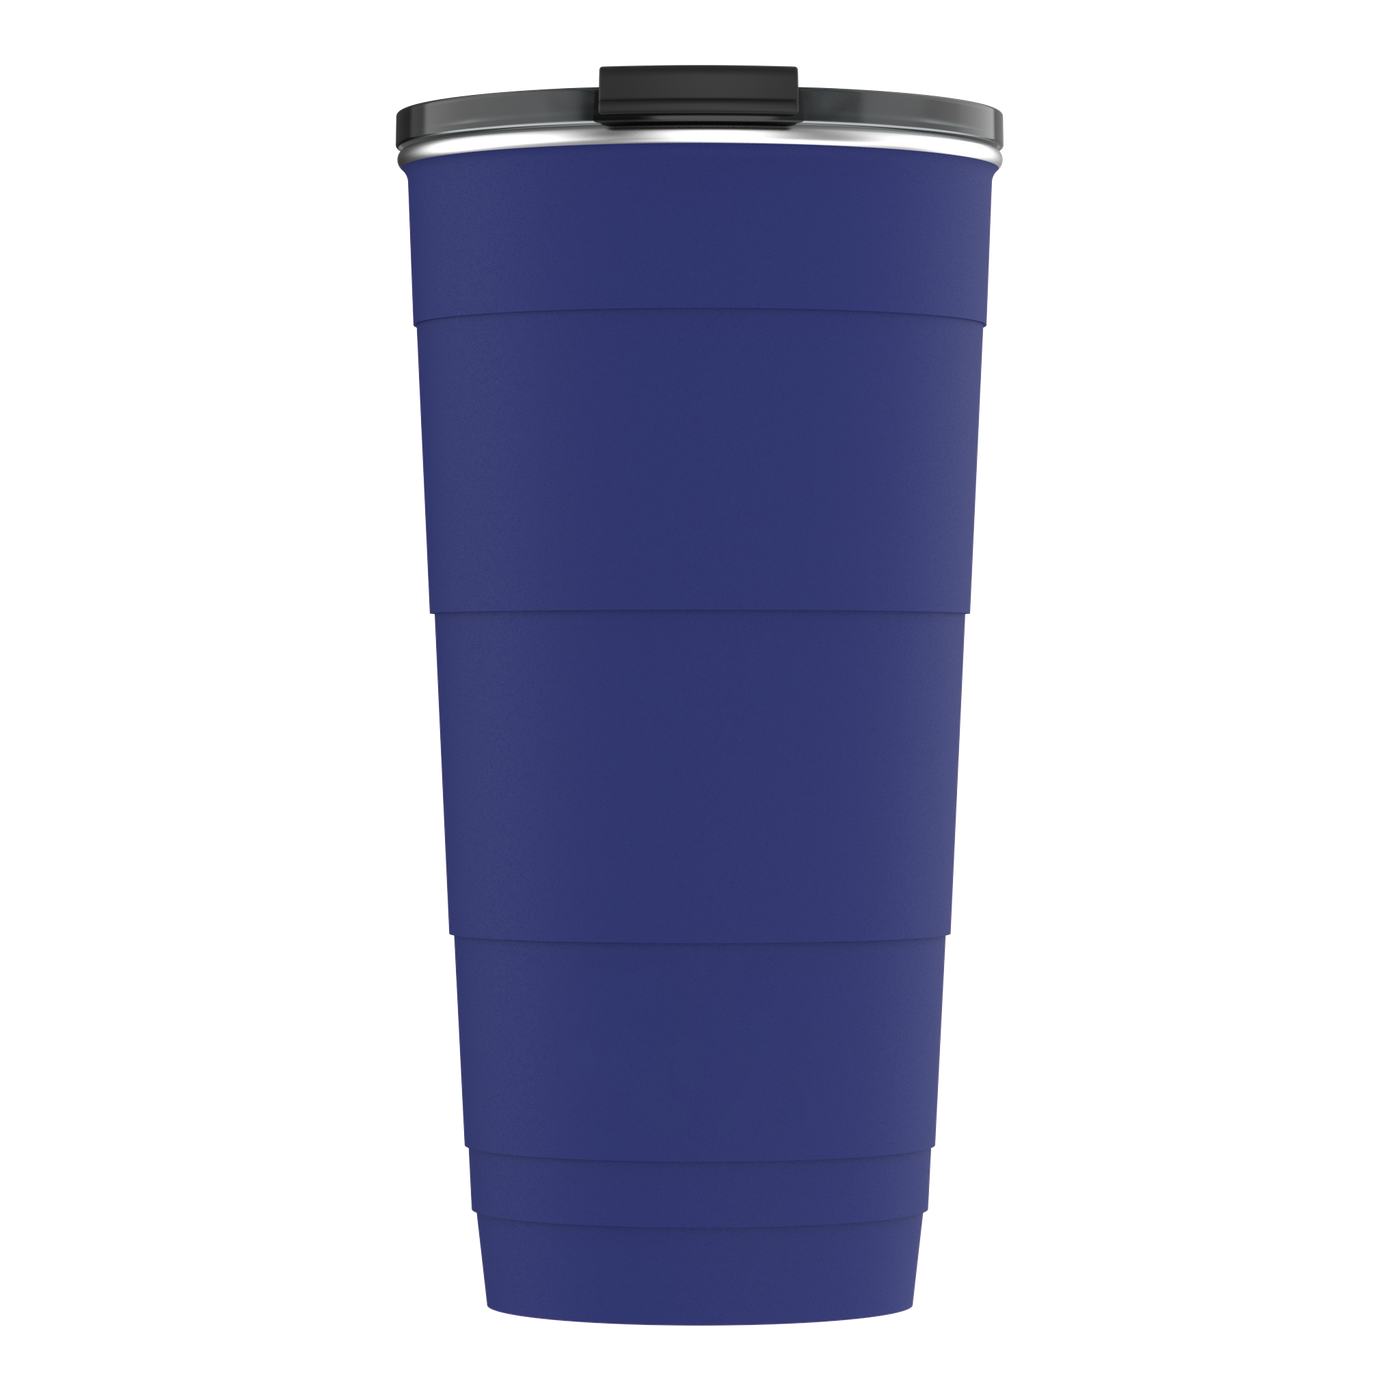 26oz Personalized Insulated Stackable Tumbler